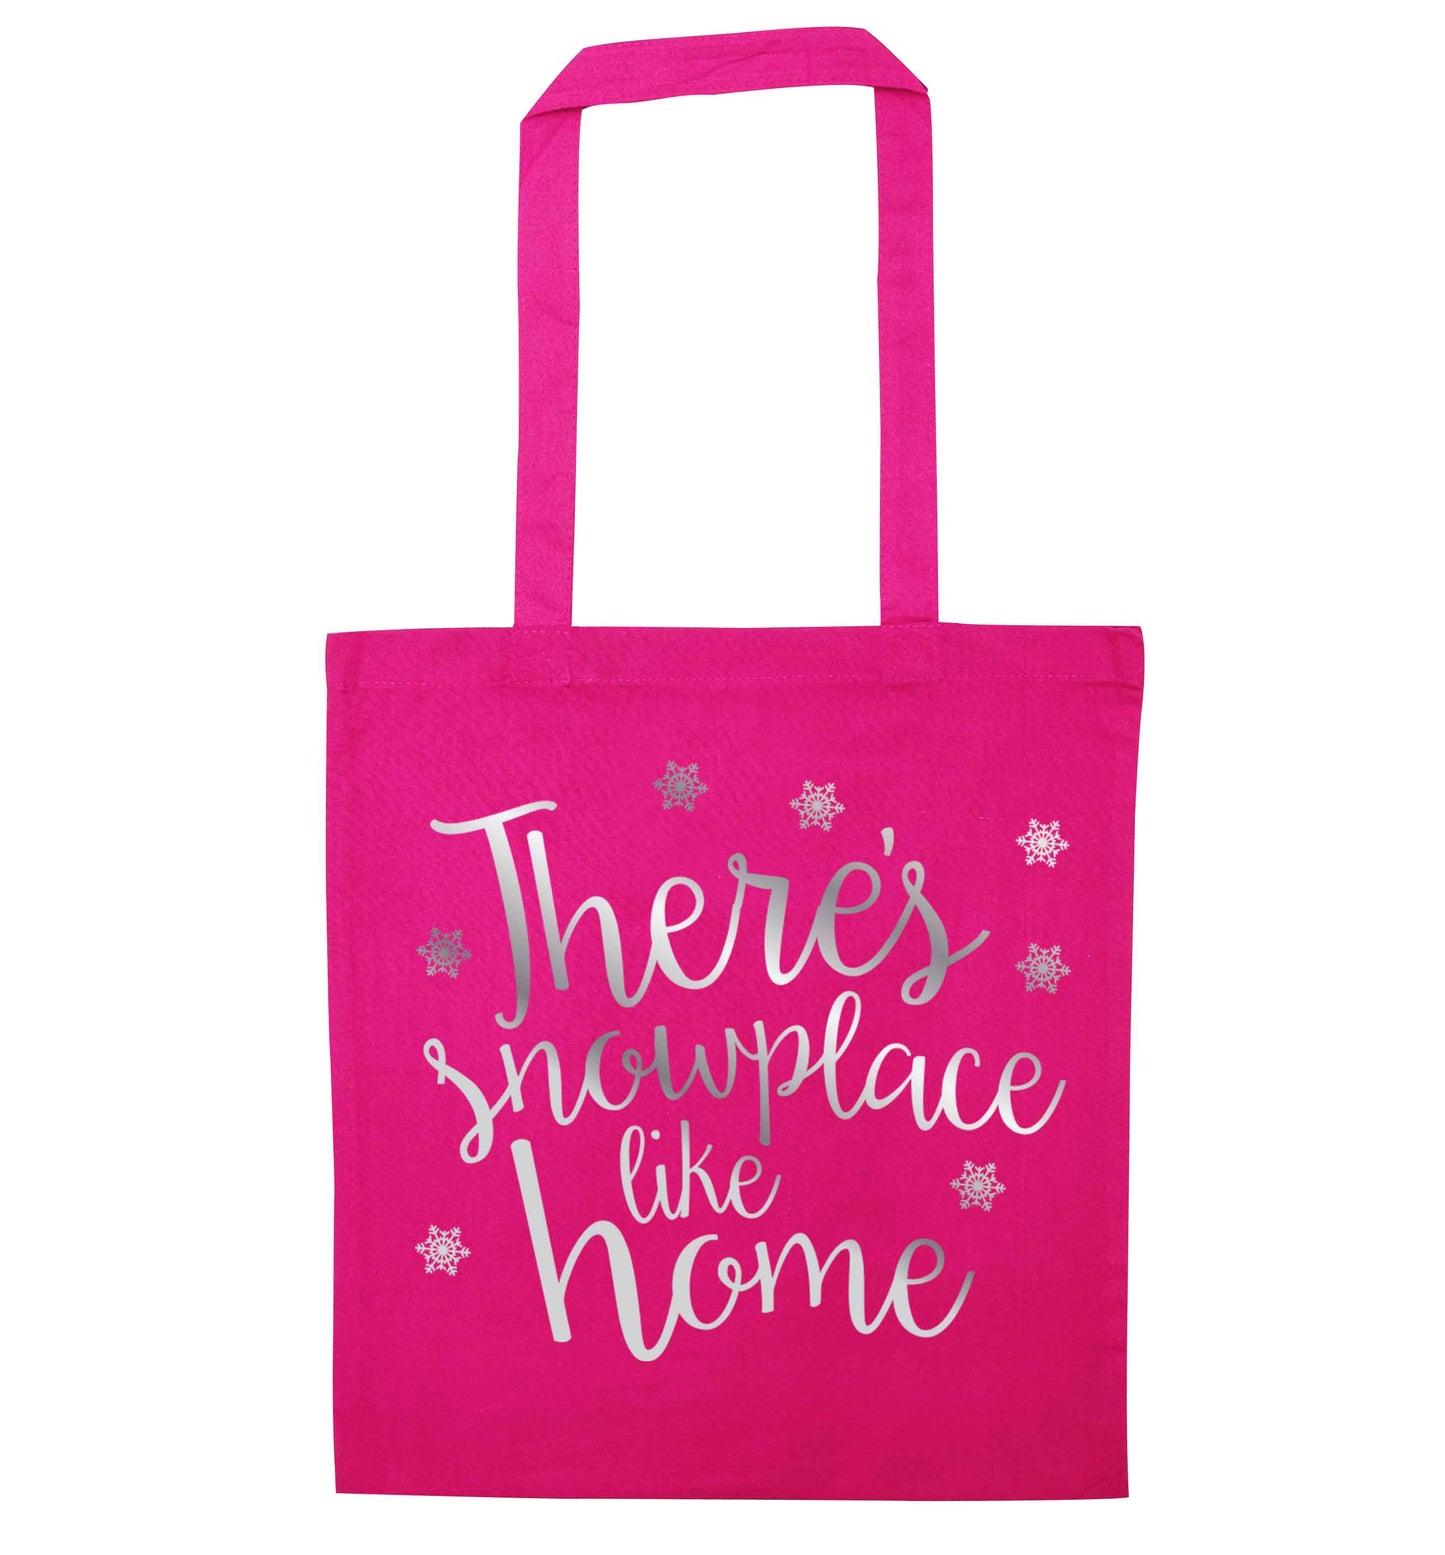 There's snowplace like home - metallic silver pink tote bag